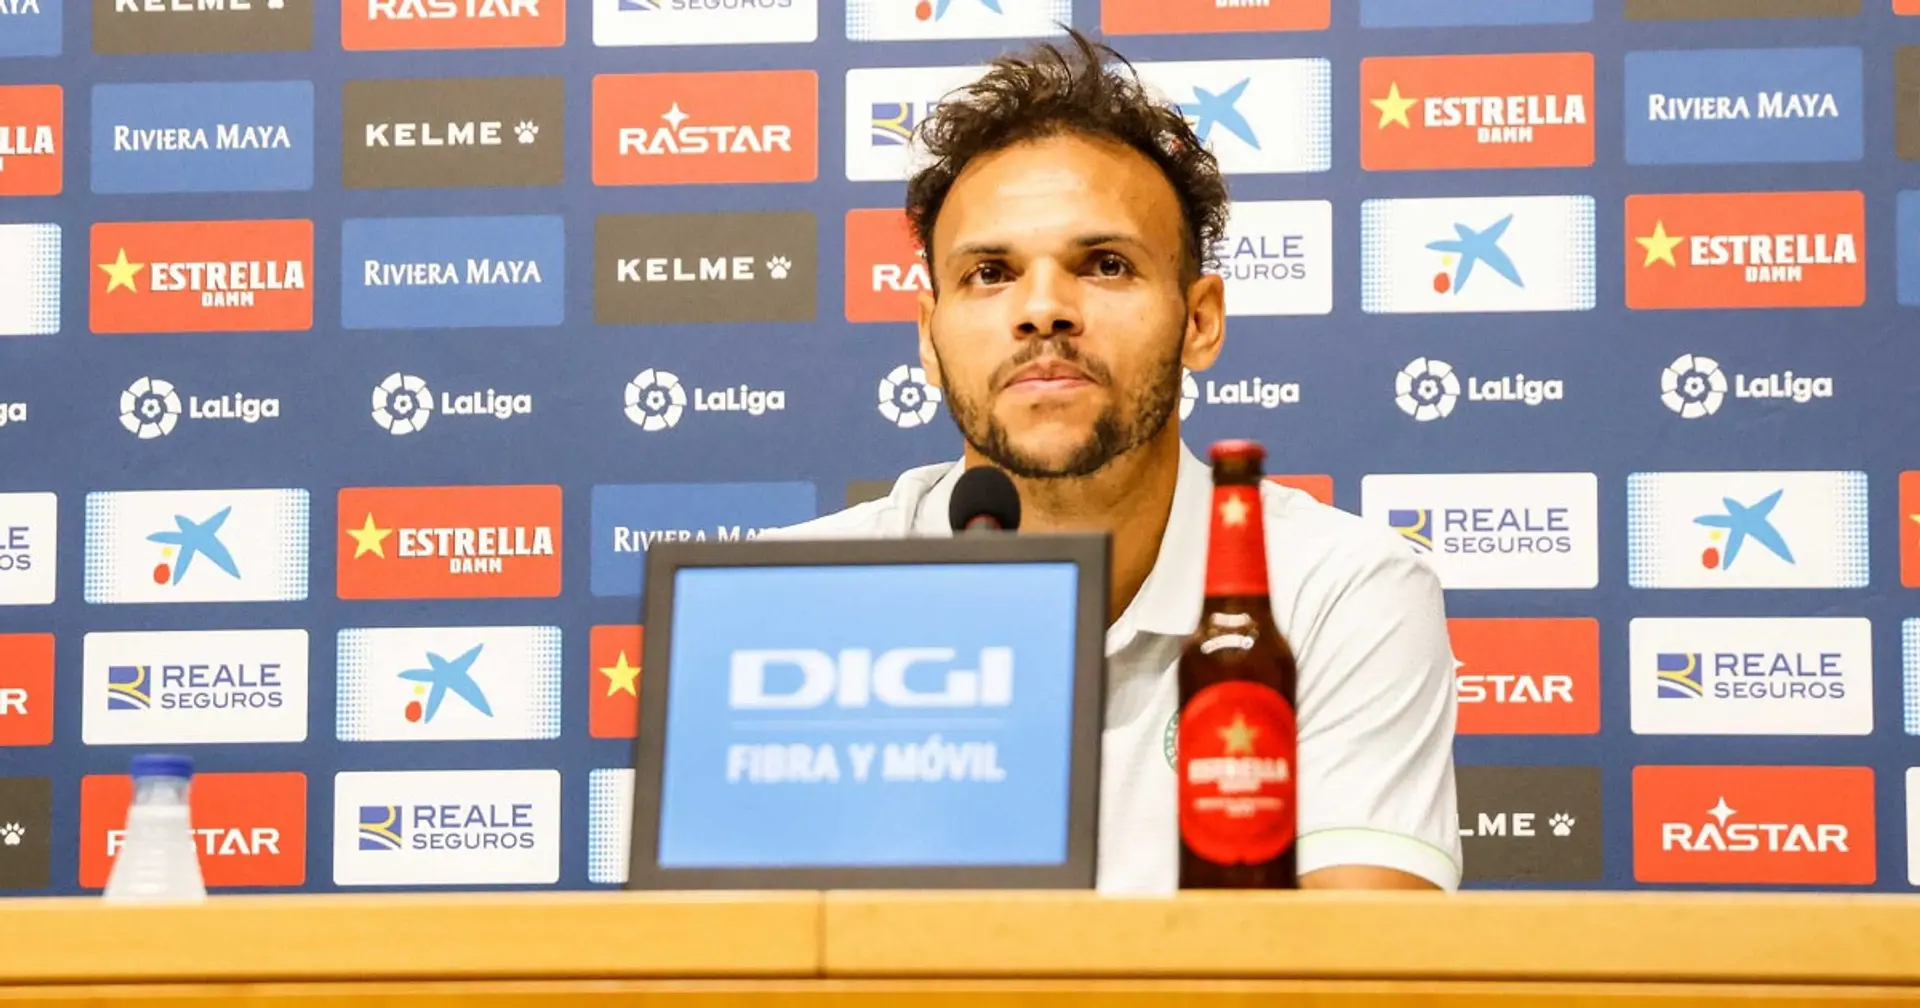 'I don't care what people say': Braithwaite on joining Barca's rivals Espanyol